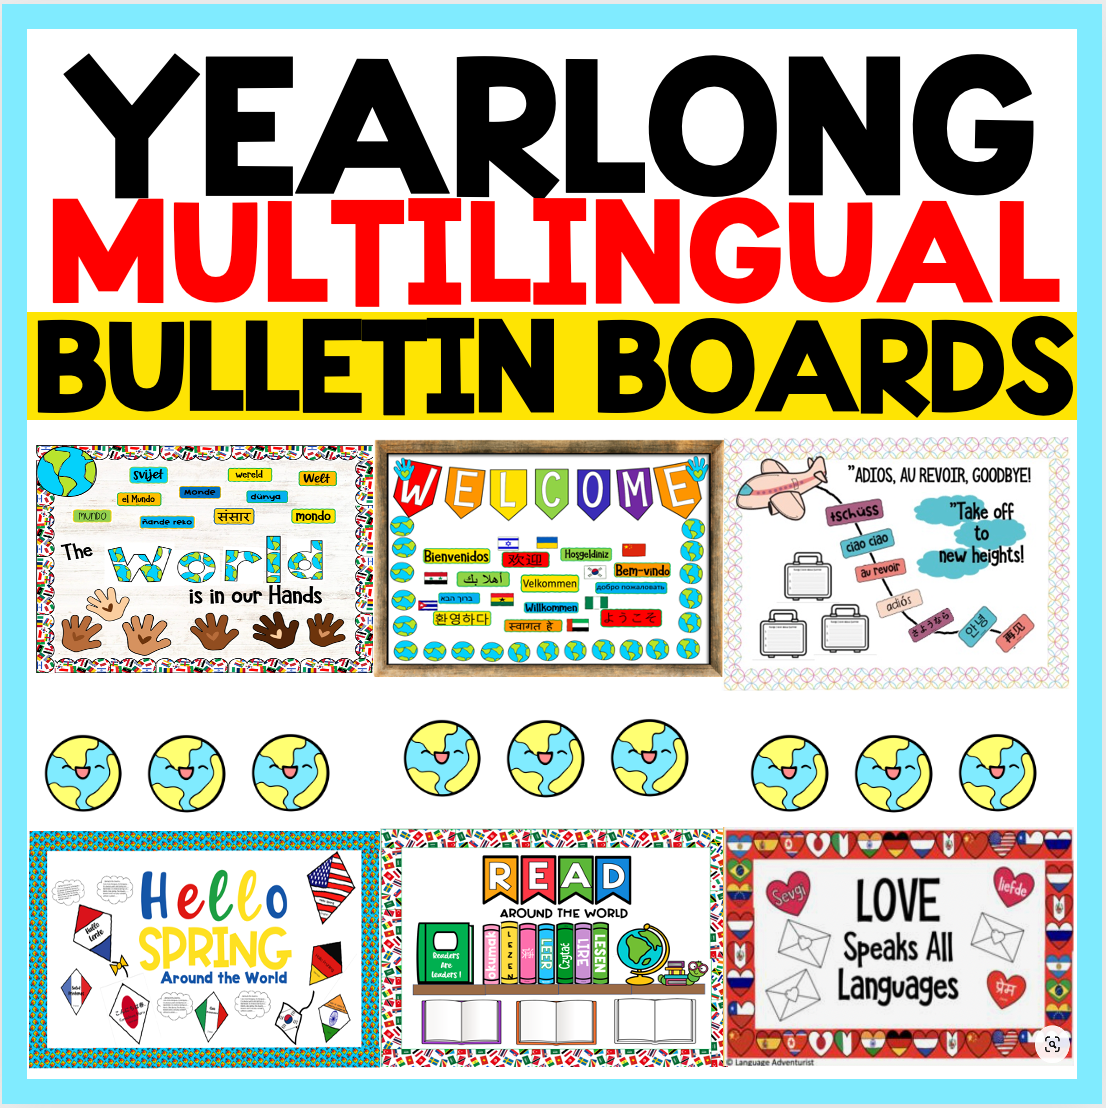 10 Creative and Colorful March Bulletin Board Ideas for an Engaging Classroom